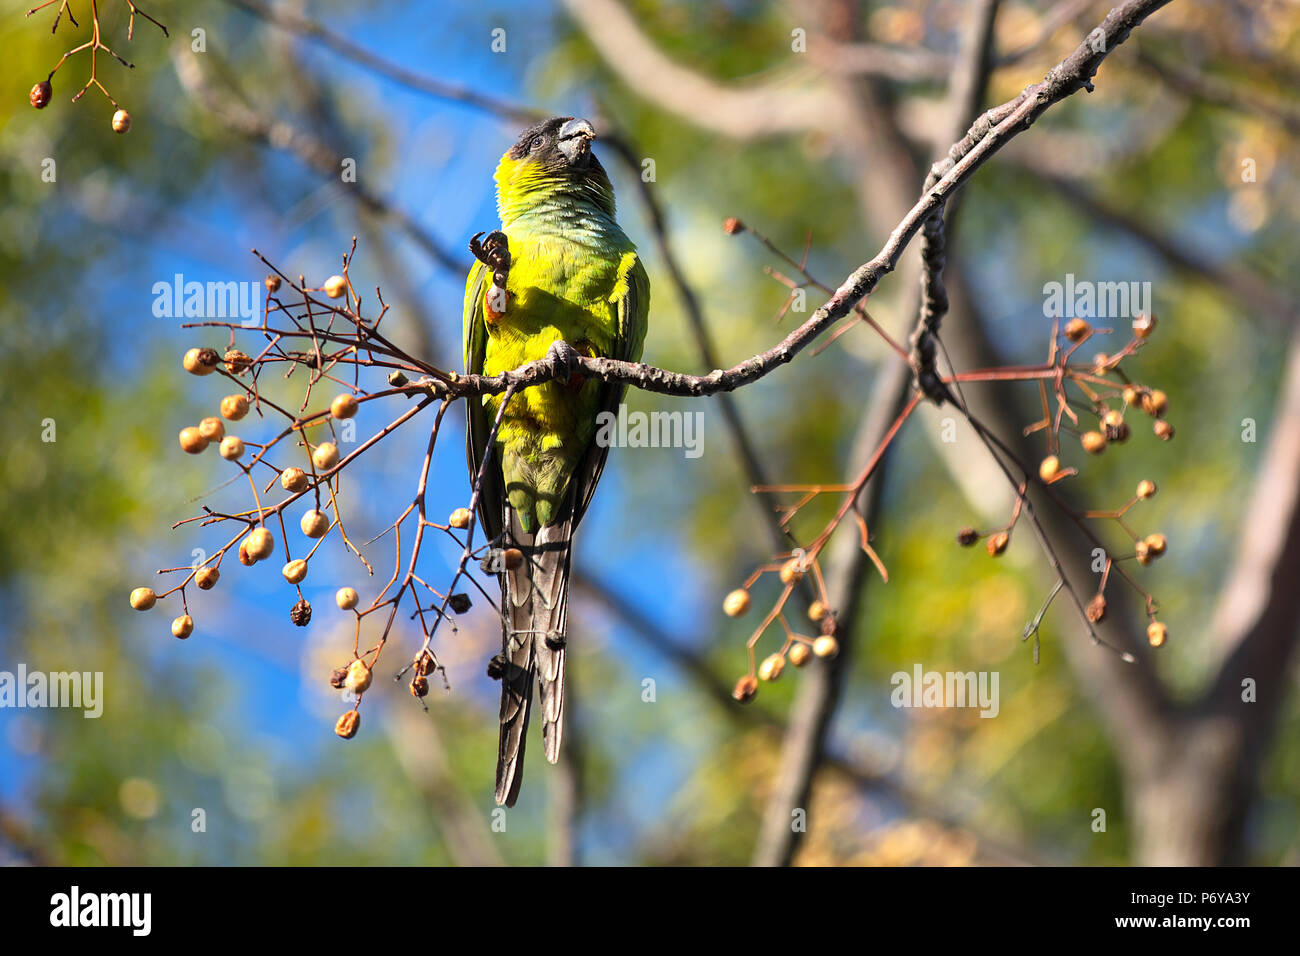 A monk parakeet (Myiopsitta monachus) inside the Ecological Reserve 'Costanera Sur'. Puerto Madero, Buenos Aires, Argentina. Stock Photo